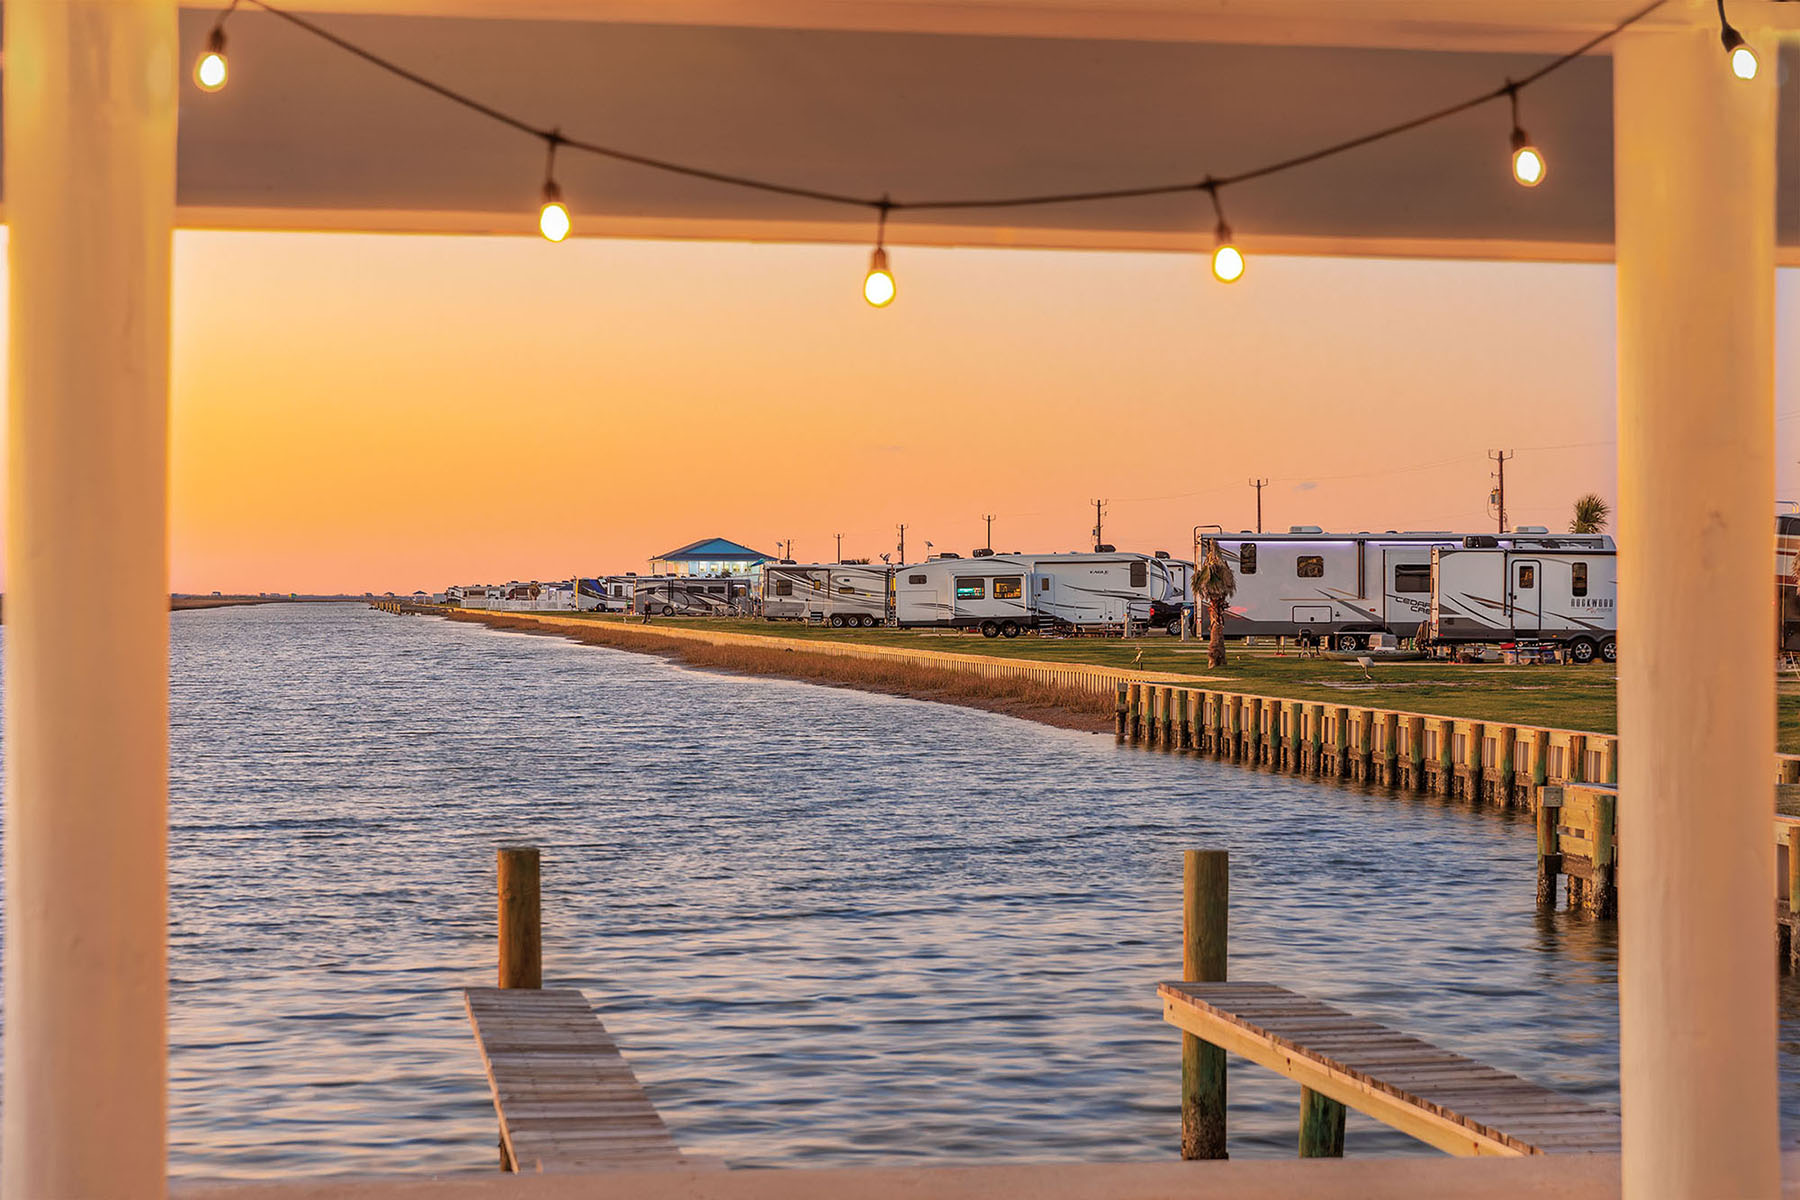 The view down a wooden pier with string lights and an orange-pink sunset